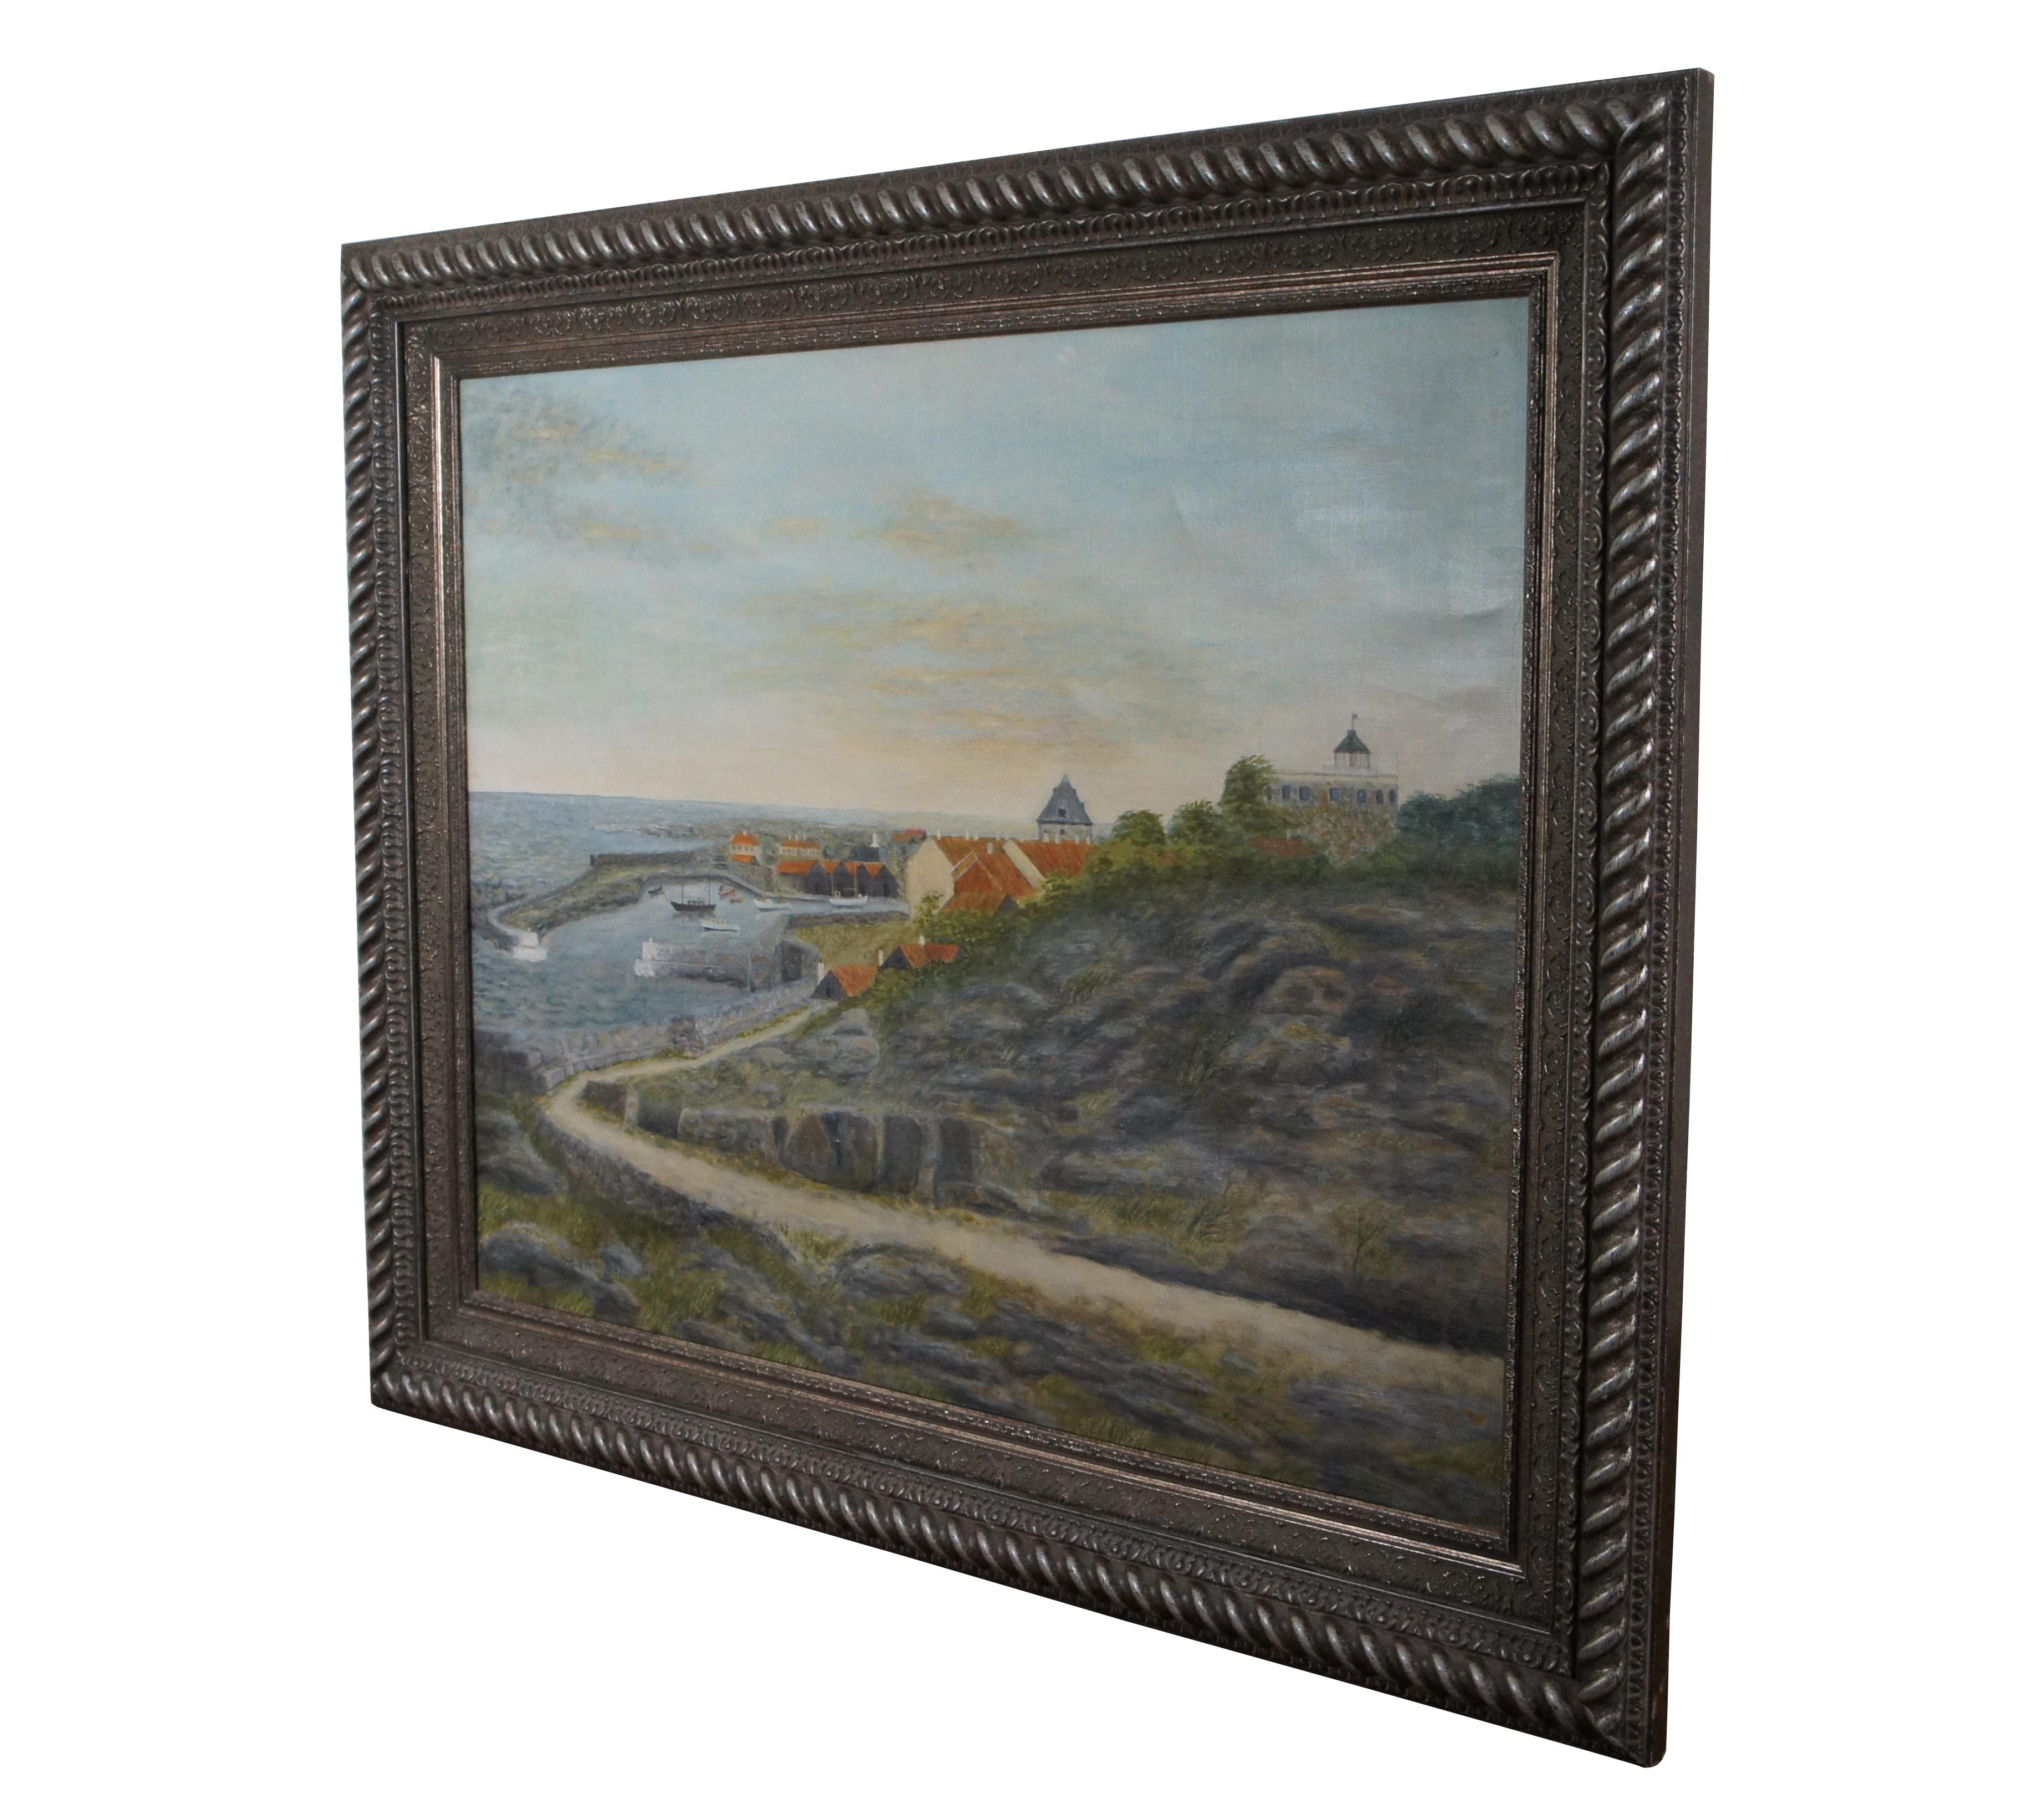 Mid century oil painting on canvas featuring a coastal landscape / nautical seascape scene with harbor and boats.  Signed lower right Jver K Madsen Pinx, 1954.

Dimensions:
33.5